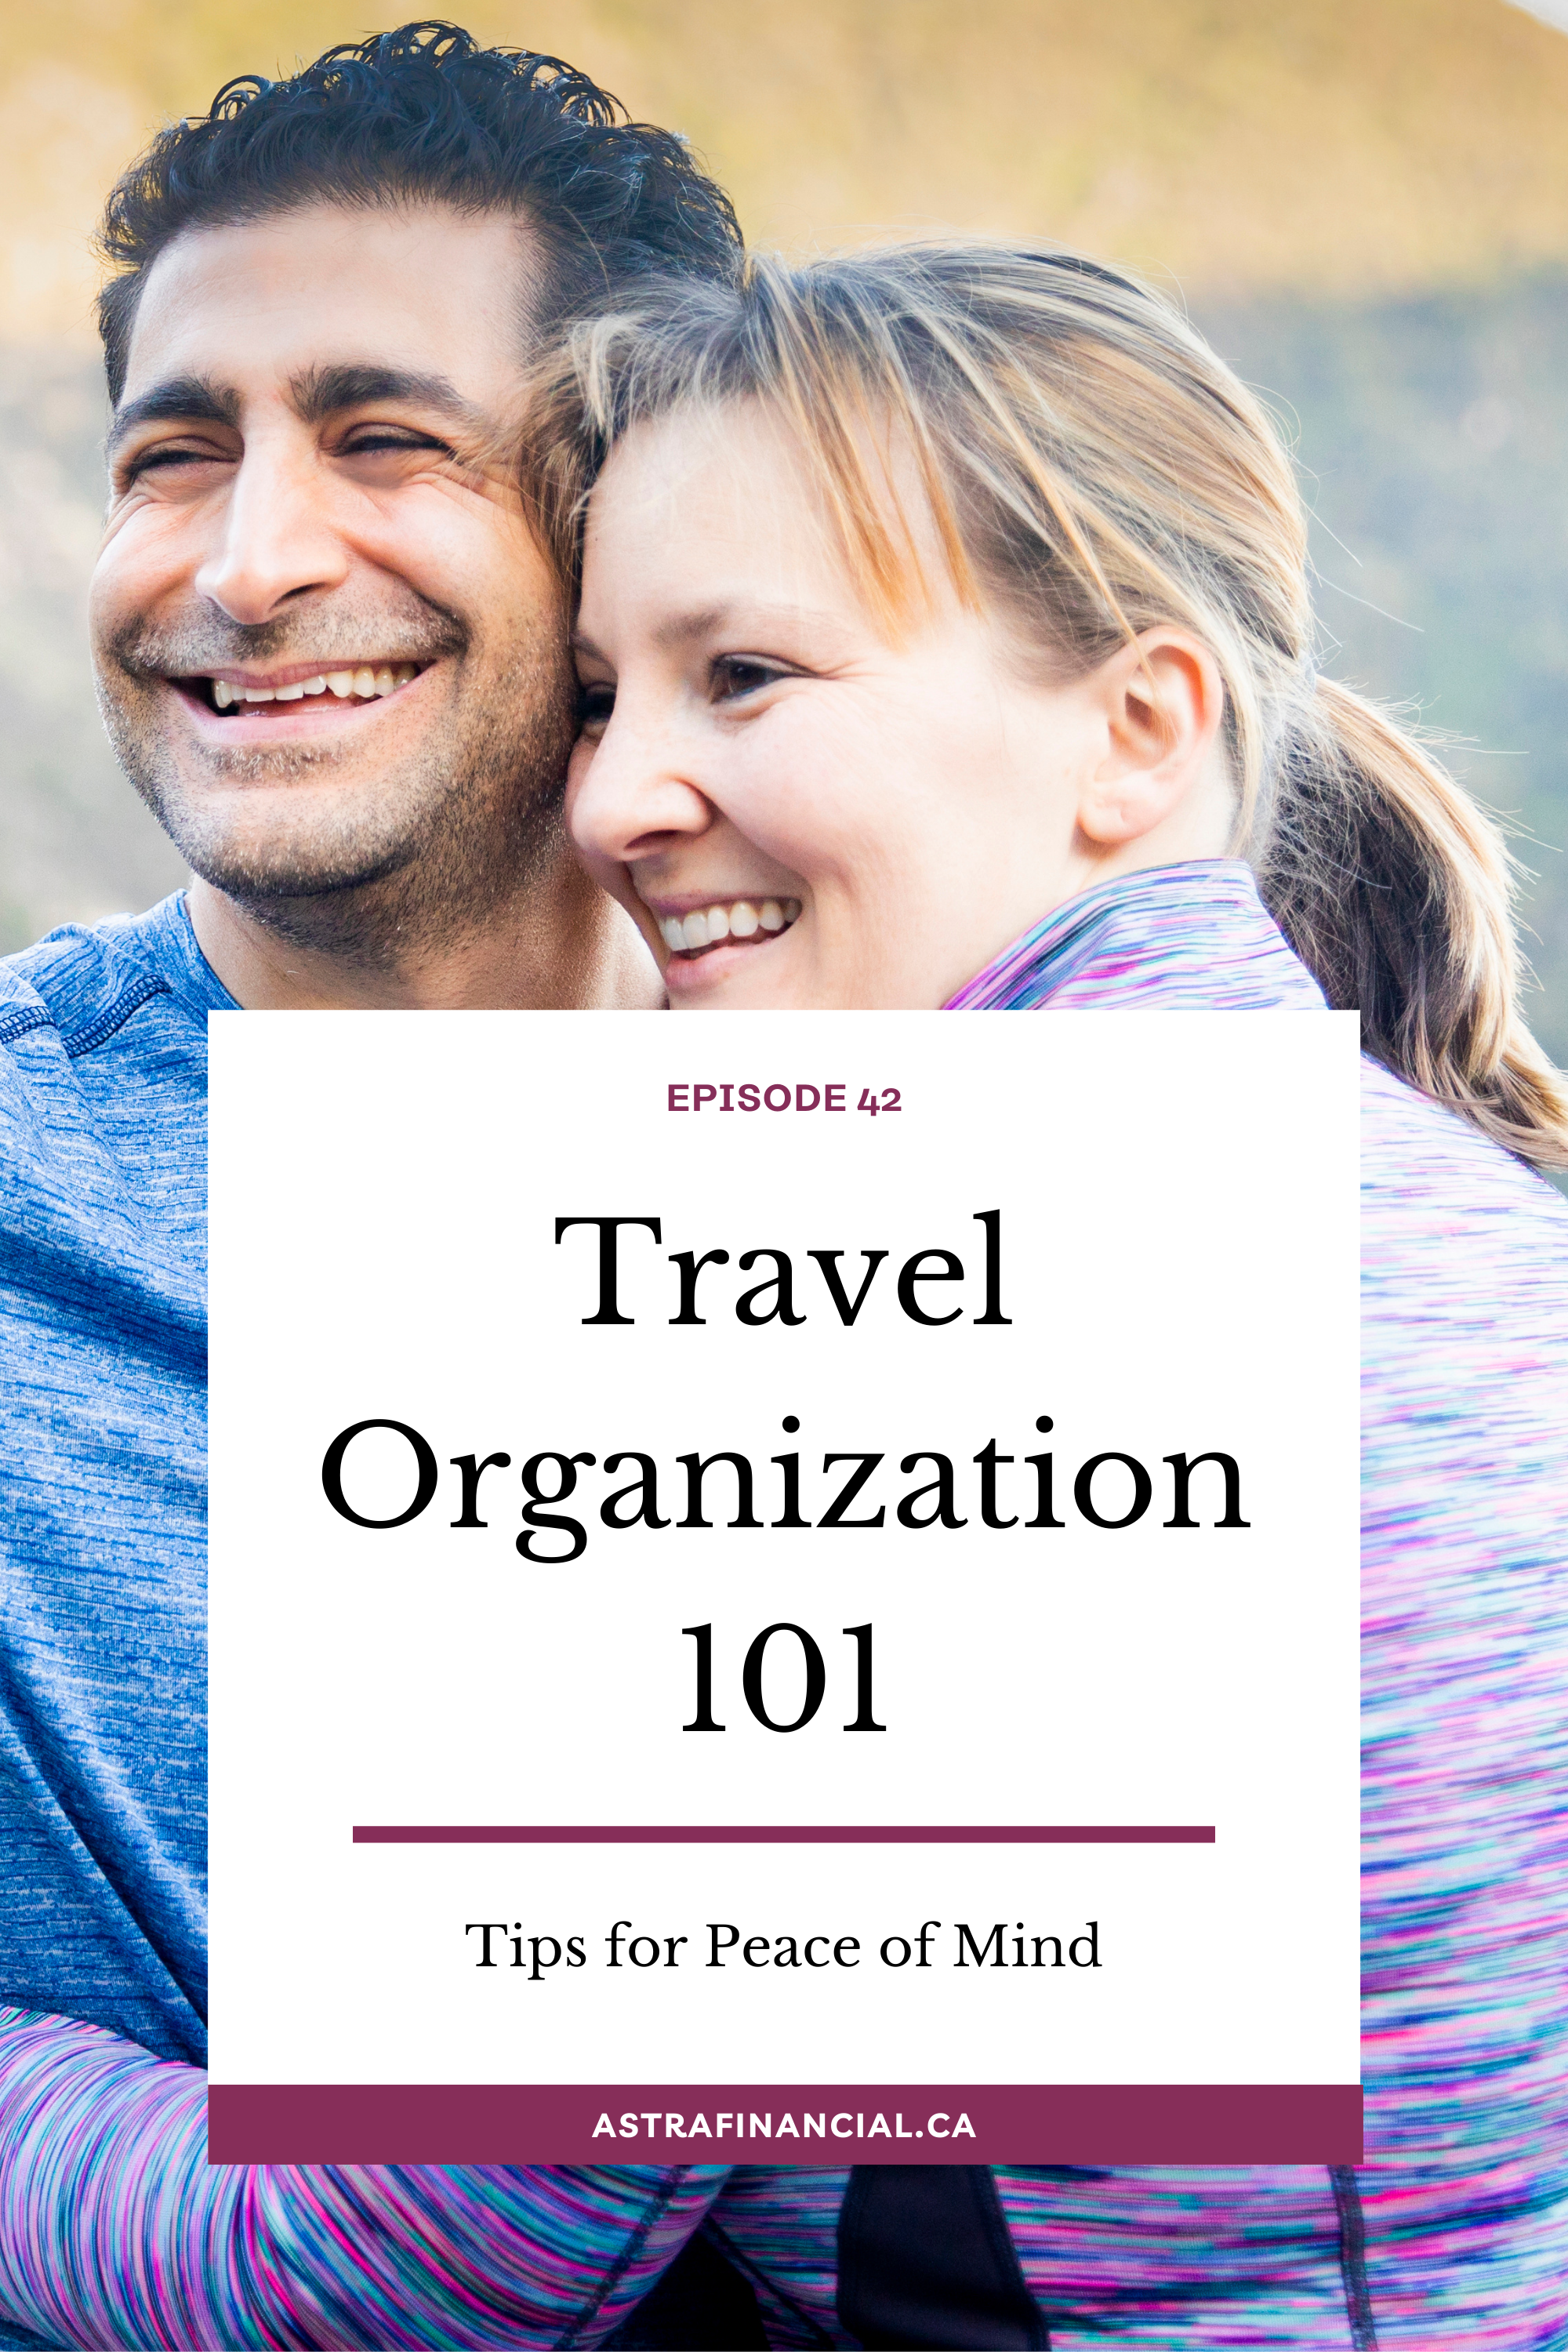 Episode 42 - Travel Organization 101 by Astra Financial 